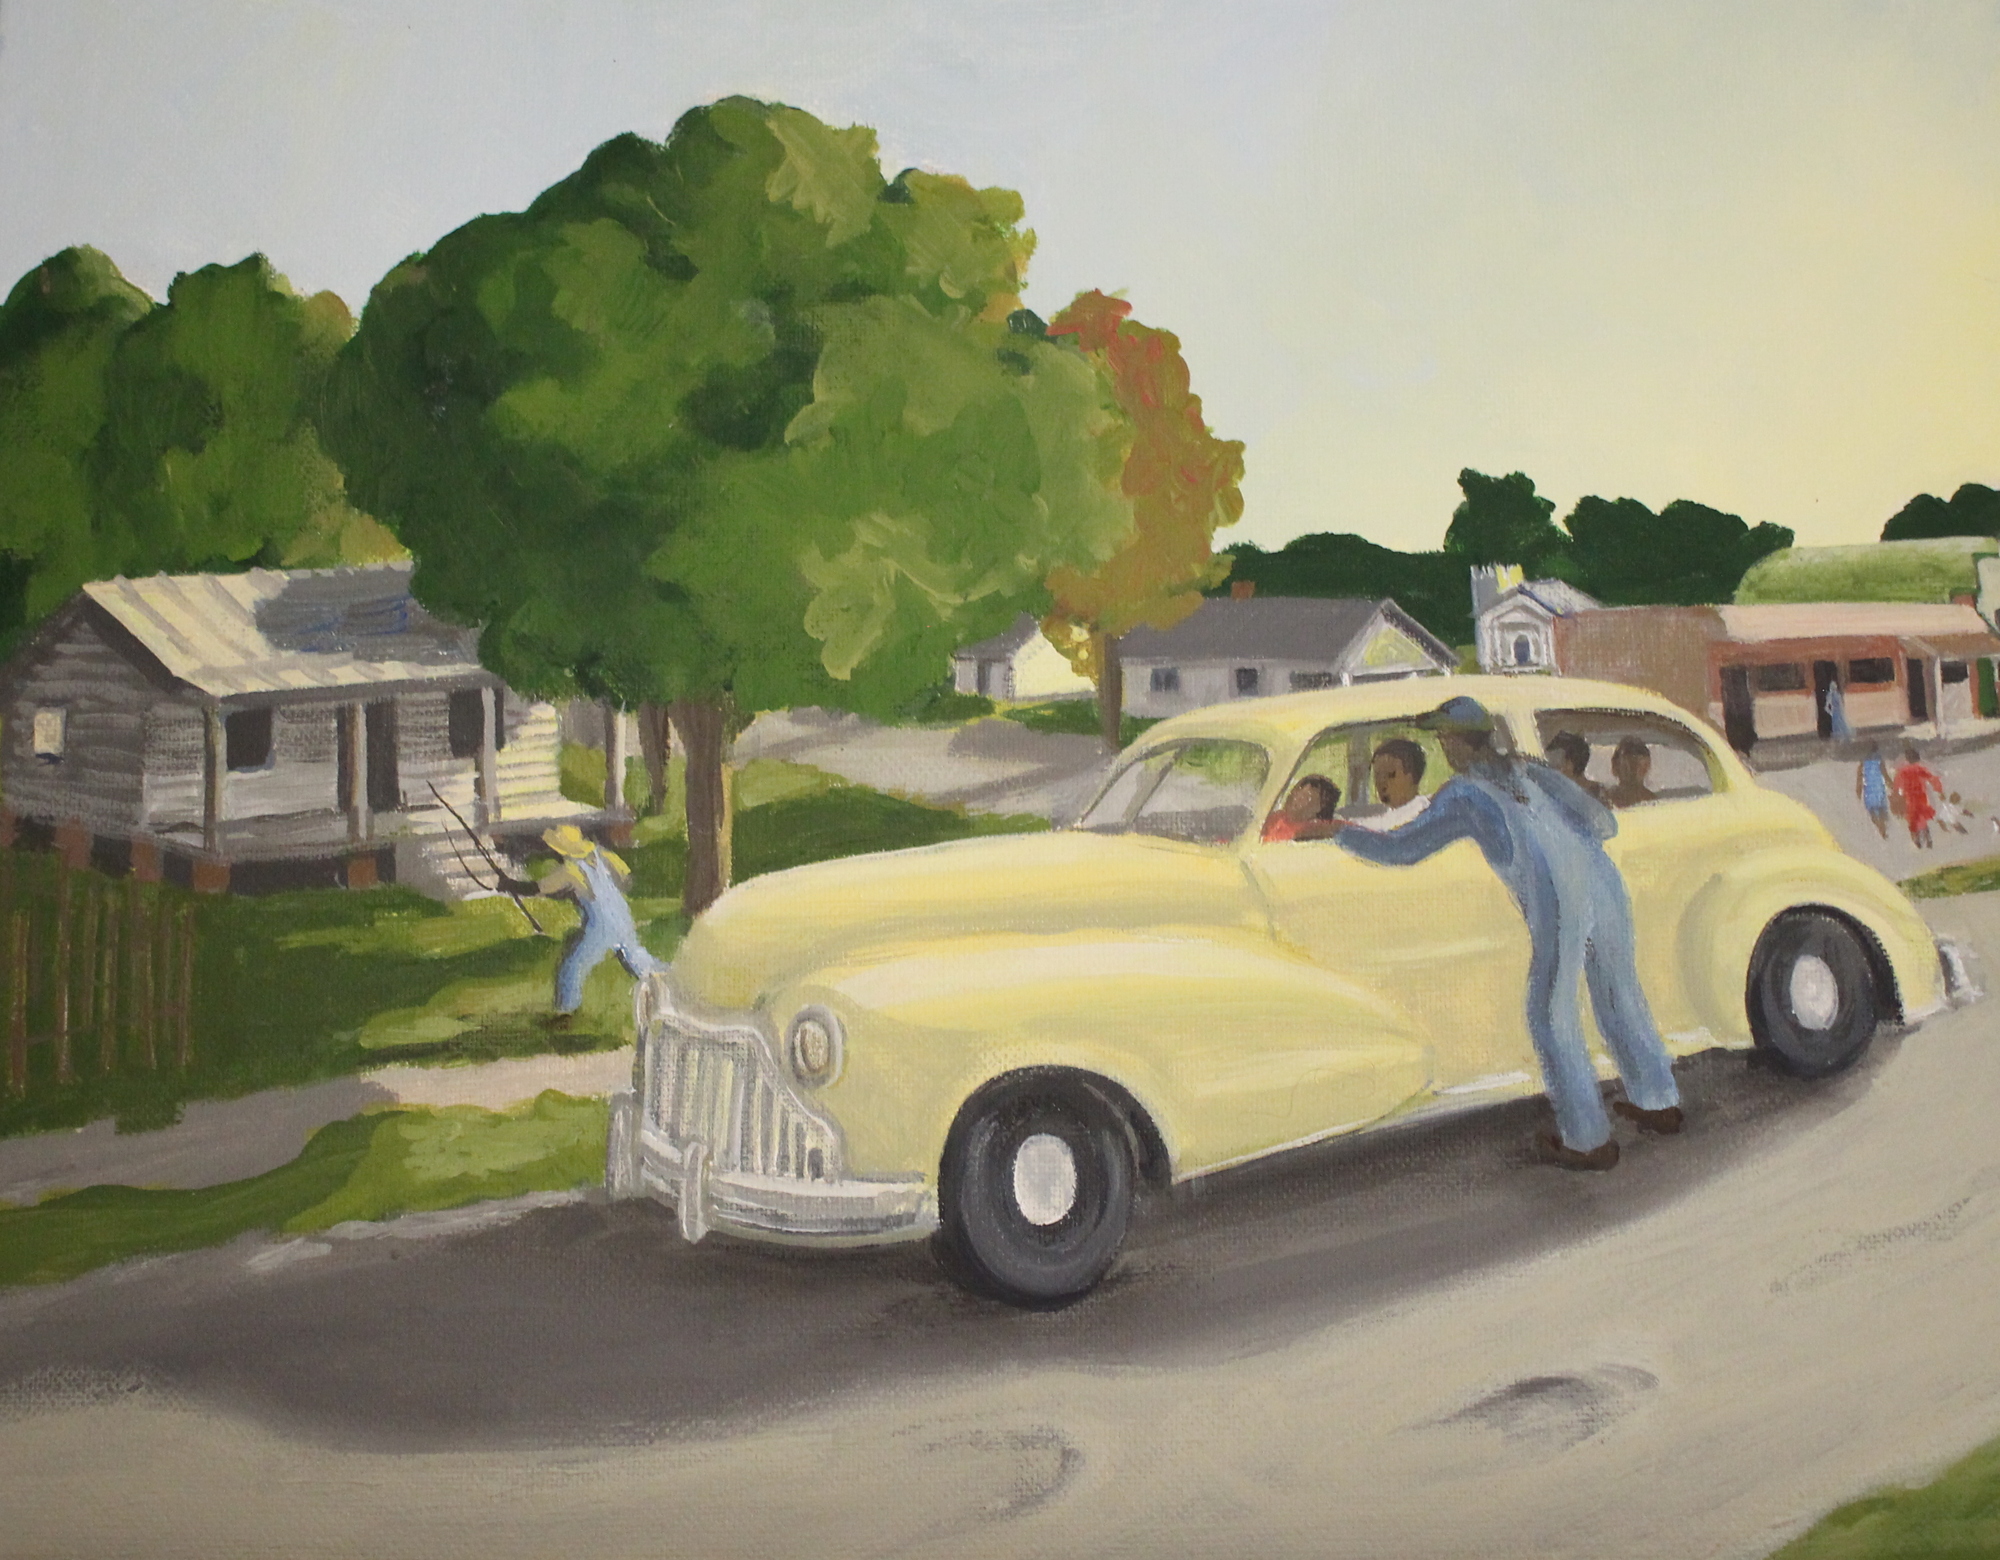 This painting depicts William S. Maxey driving around the community to check on his students.